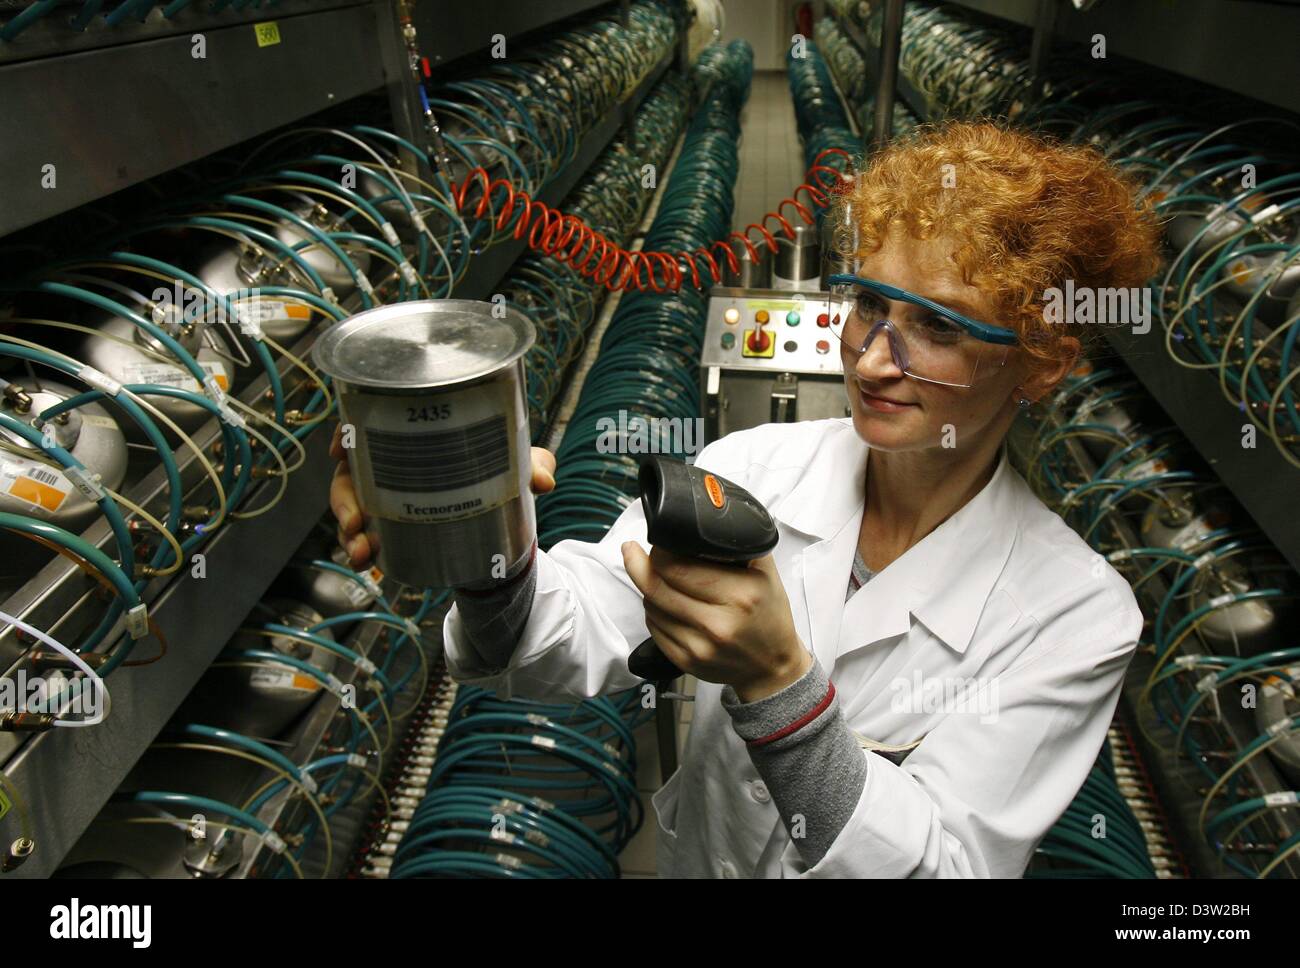 A staff member of aromatics and flavourings producer Symrise scans raw material in the Symrise plant of Holzminden, Germany, Thursday, 07 December 2006. Symrise plans to go public on Monday, 11 December and has good chances to become this year's biggest new listing with a business volume of up to 1.4 billion euro. Photo: Jochen Luebke Stock Photo